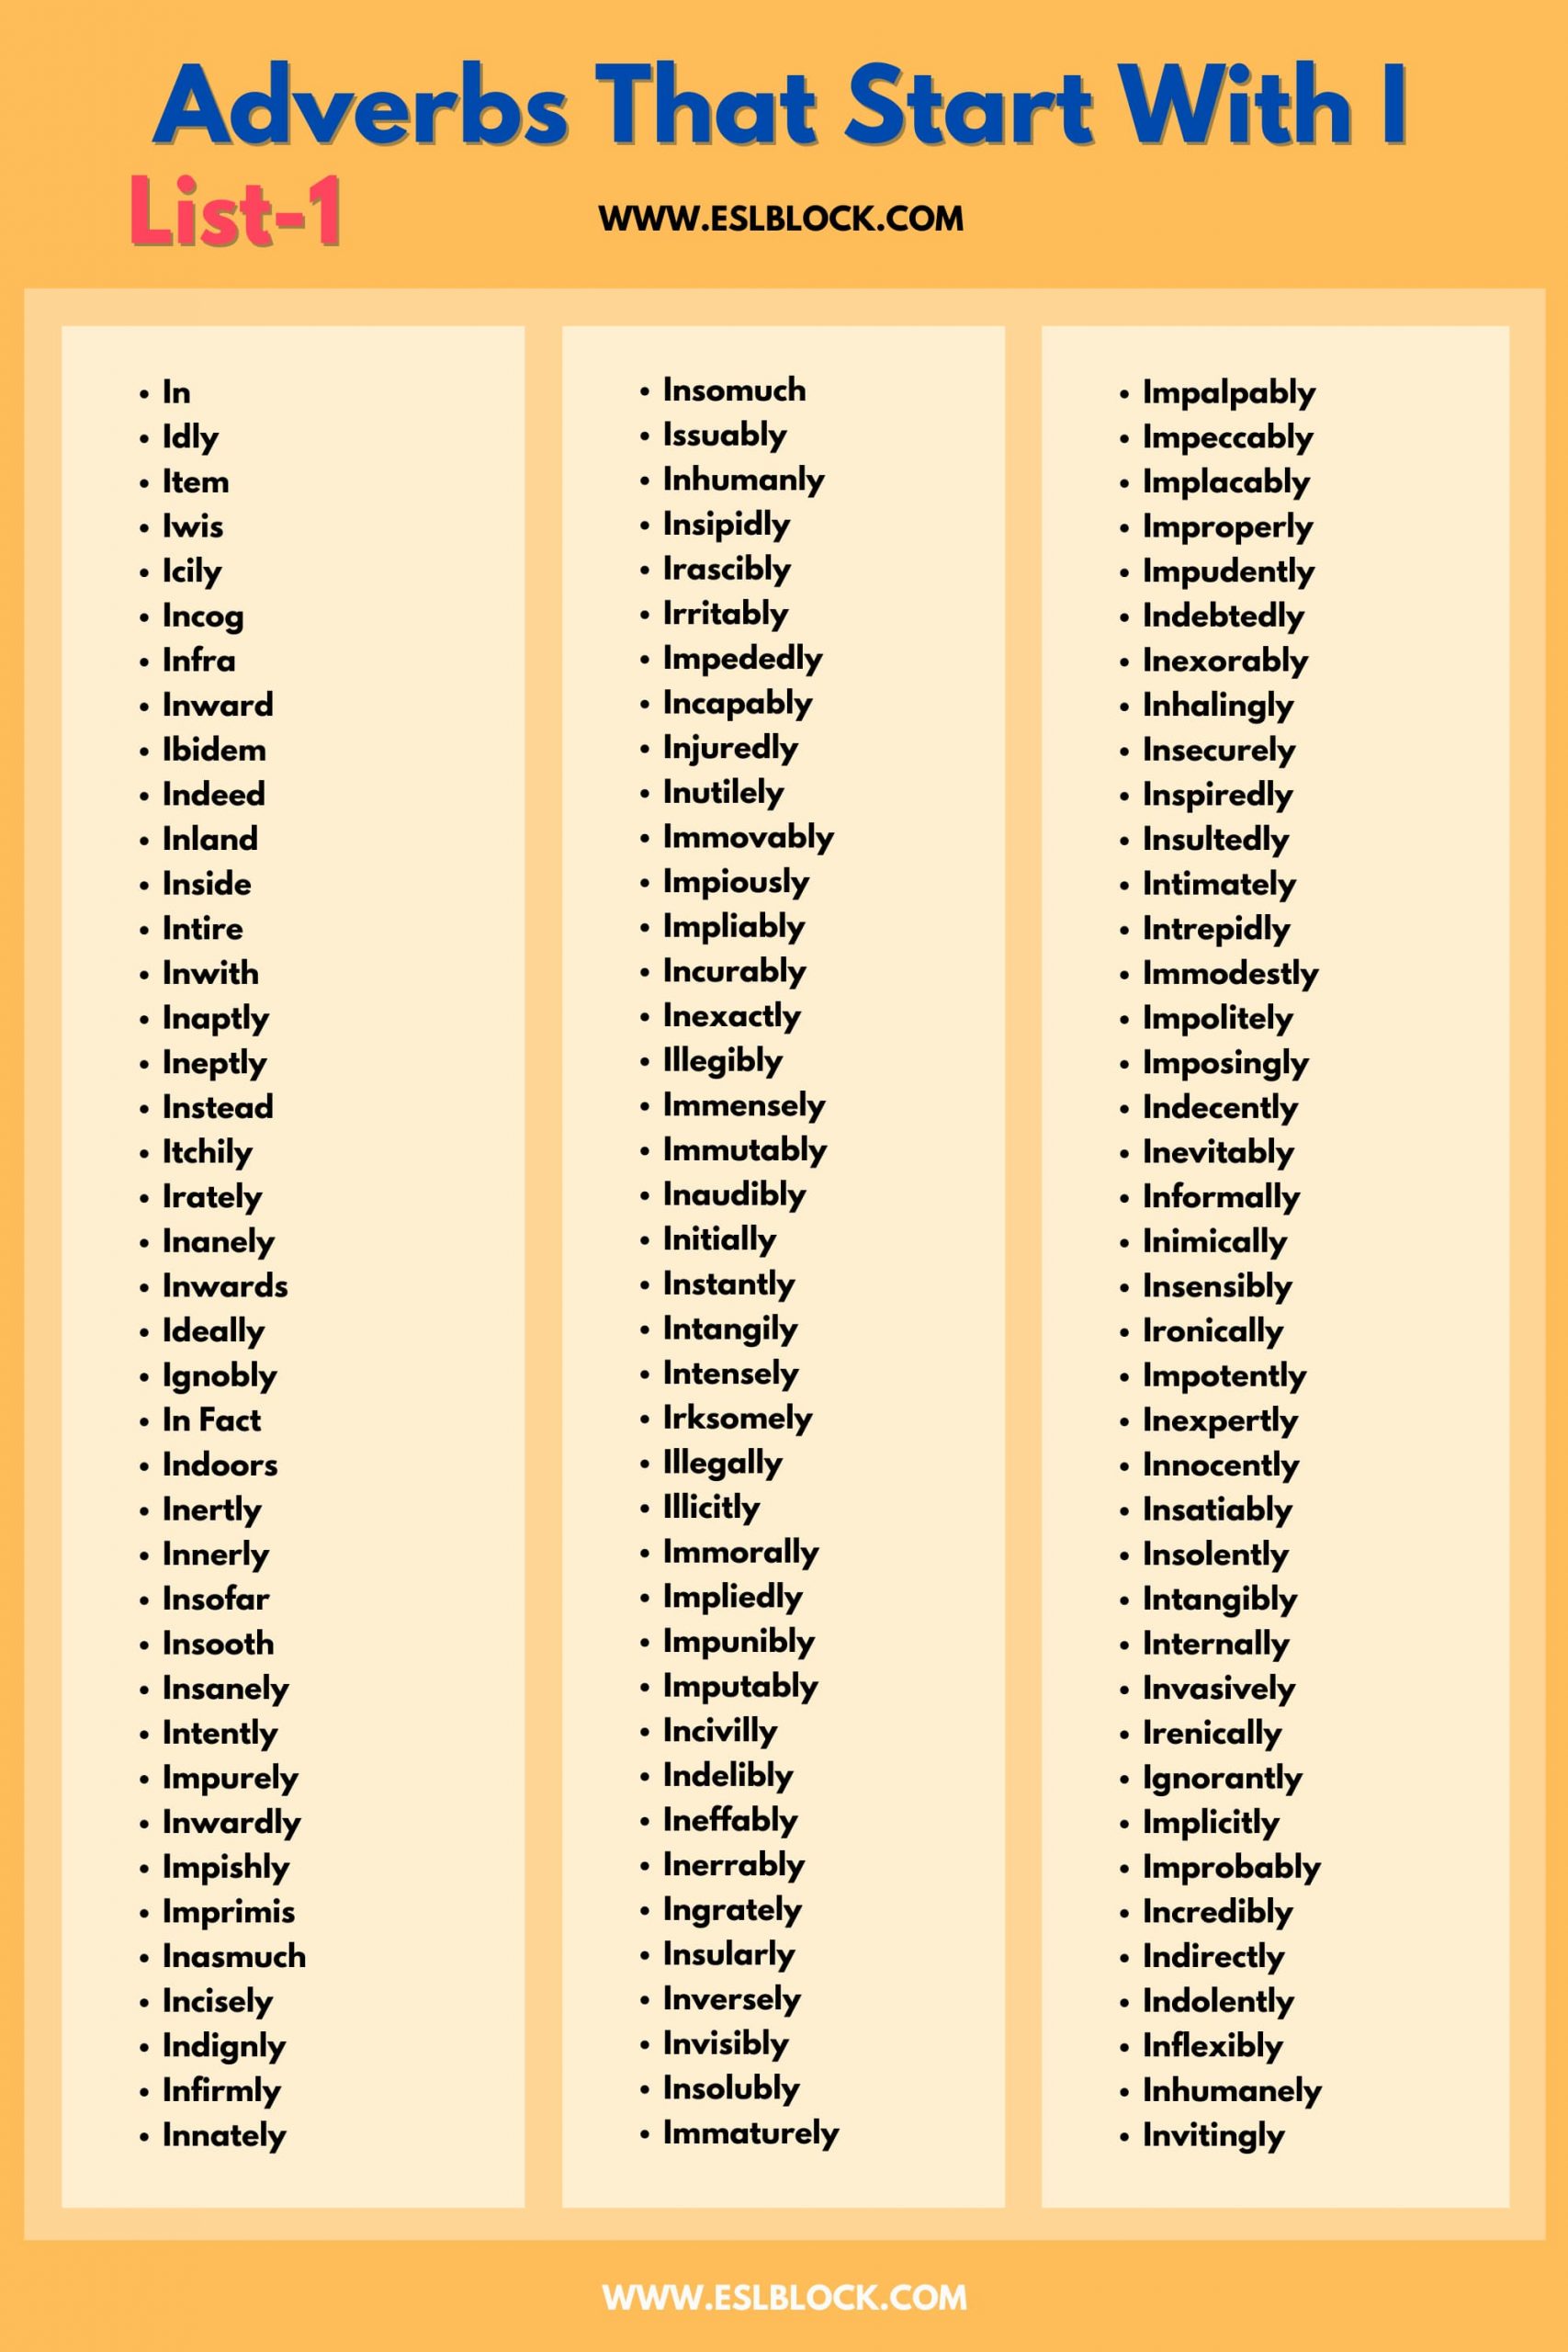 100 Example Sentences Using Adverbs, 4 Letter Adverbs That Start with I, 4 Letter Words, 5 Letter Adverbs That Start with I, 5 Letter Words, 6 Letter Adverbs That Start with I, 6 Letter Words, A to Z Adverbs, AA Adverbs, Adverb vocabulary words, Adverbs, Adverbs That Start with I, Adverbs with Example Sentences, All Adverbs, Types of Adverbs, Types of Adverbs with Example Sentences, Vocabulary, What are Adverbs, What are the types of Adverbs, Words That with I